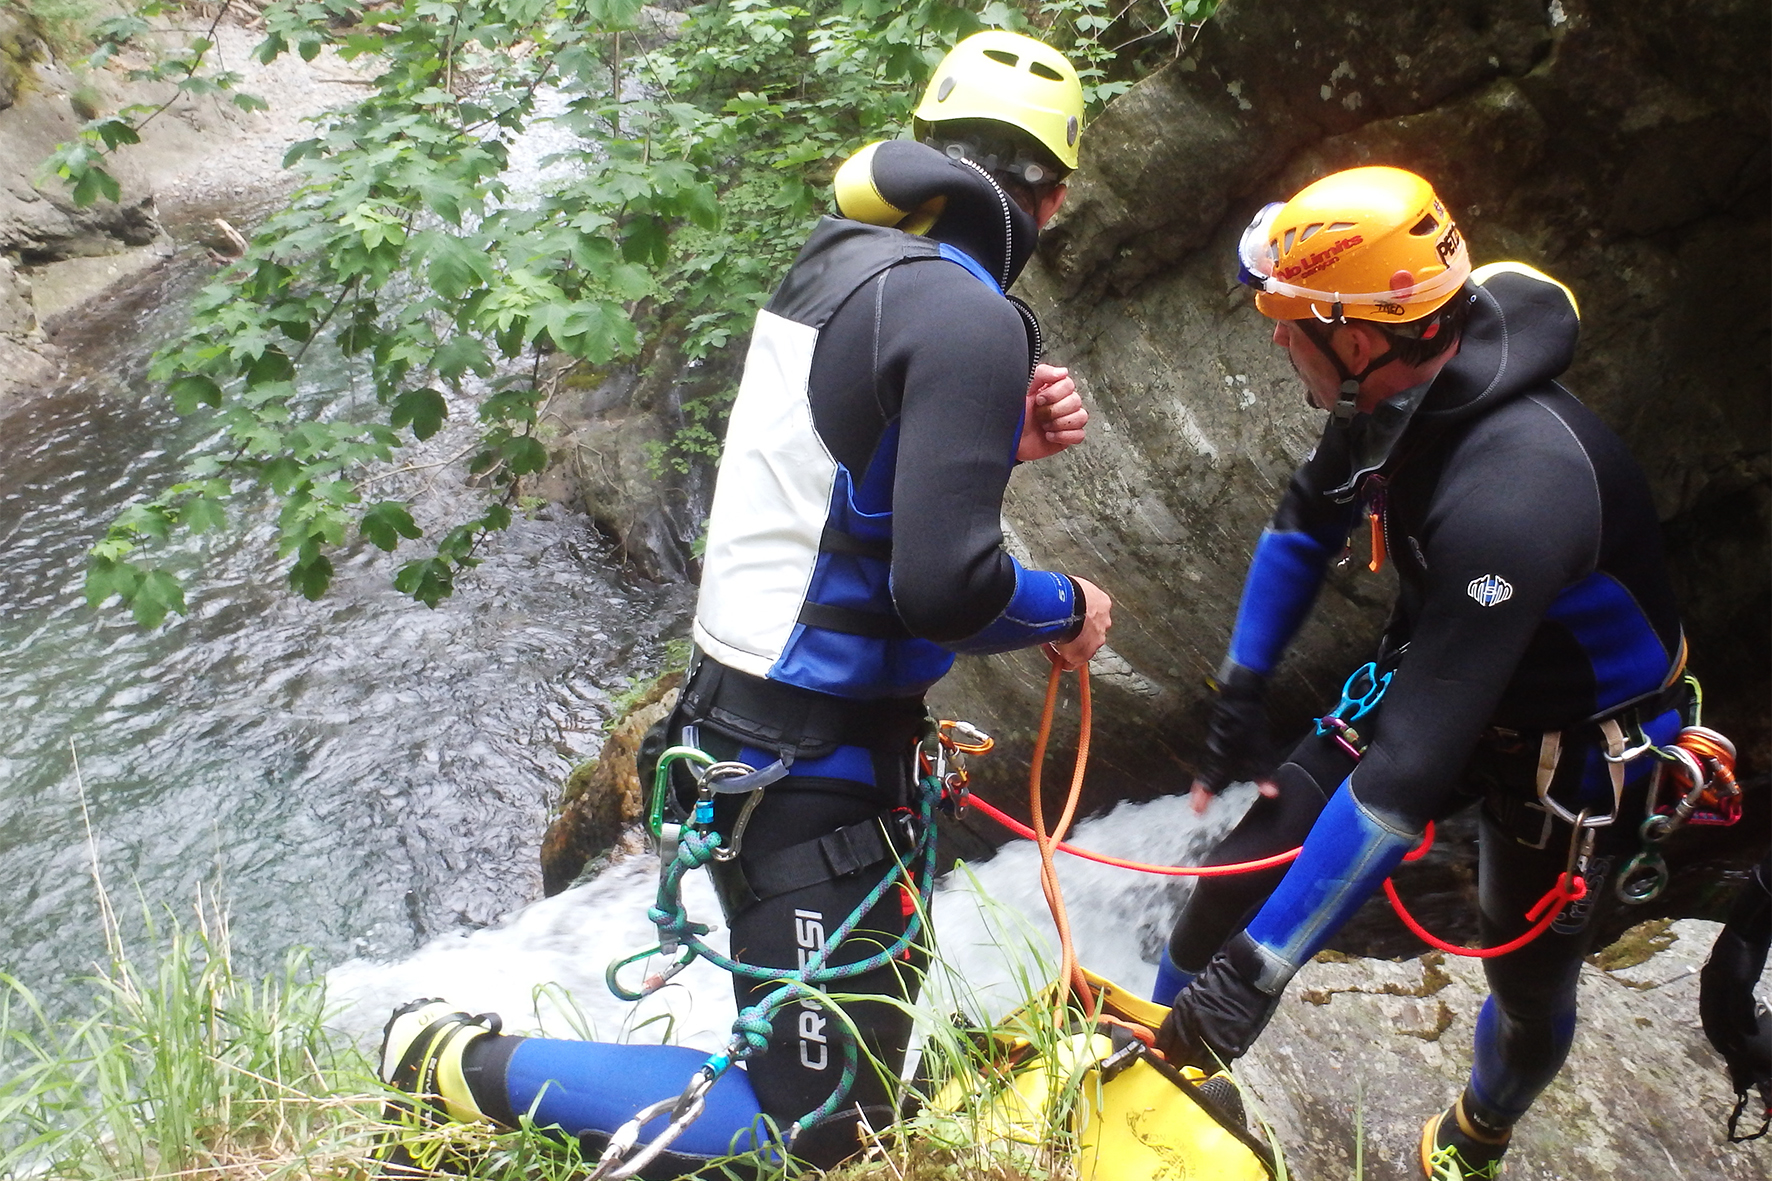 formation_canyoning.jpg